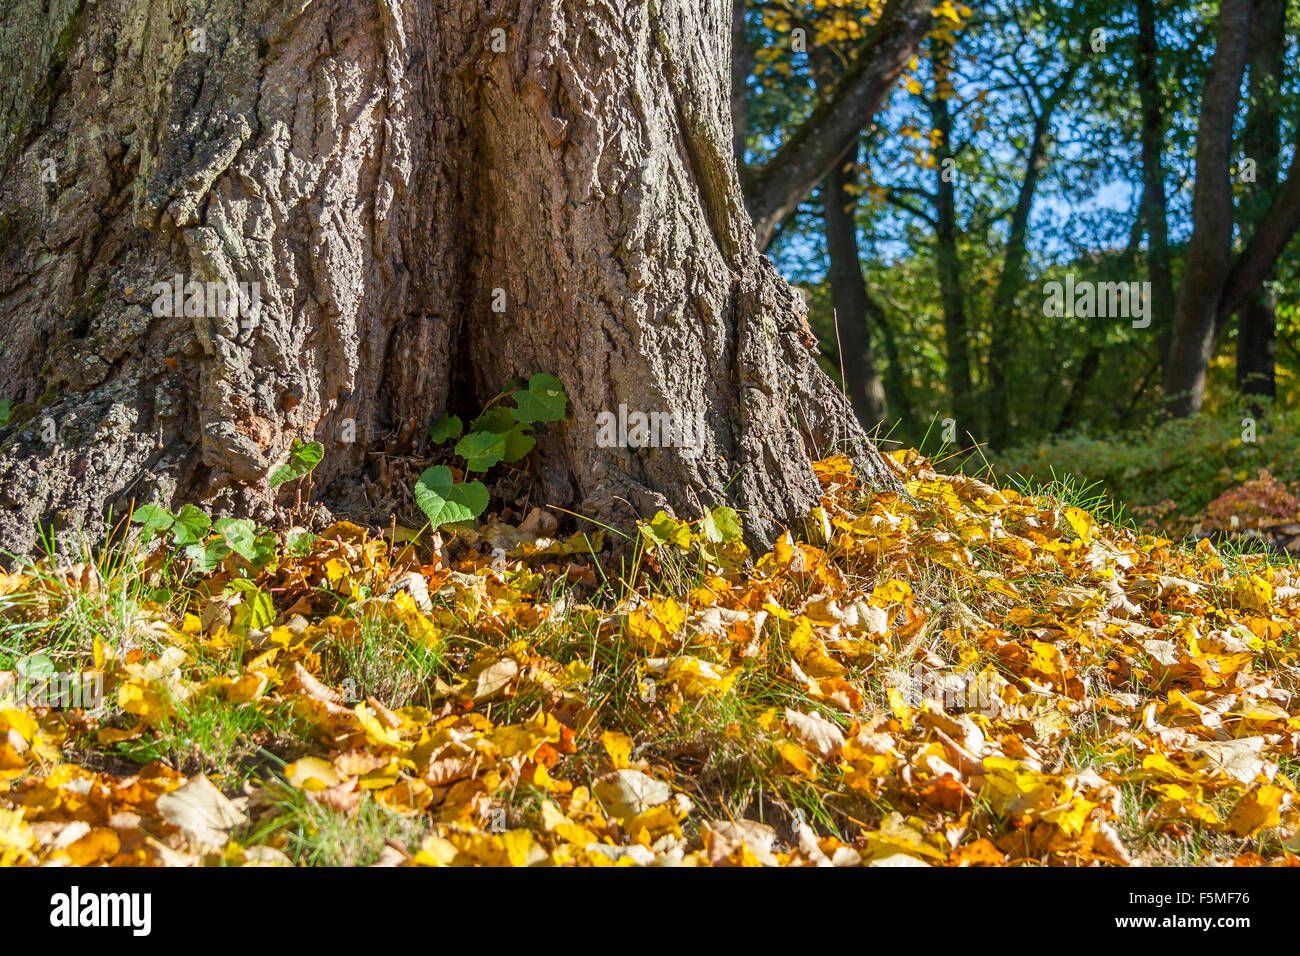 Leaves Falling From An Autumn Maple Tree Stock Photo